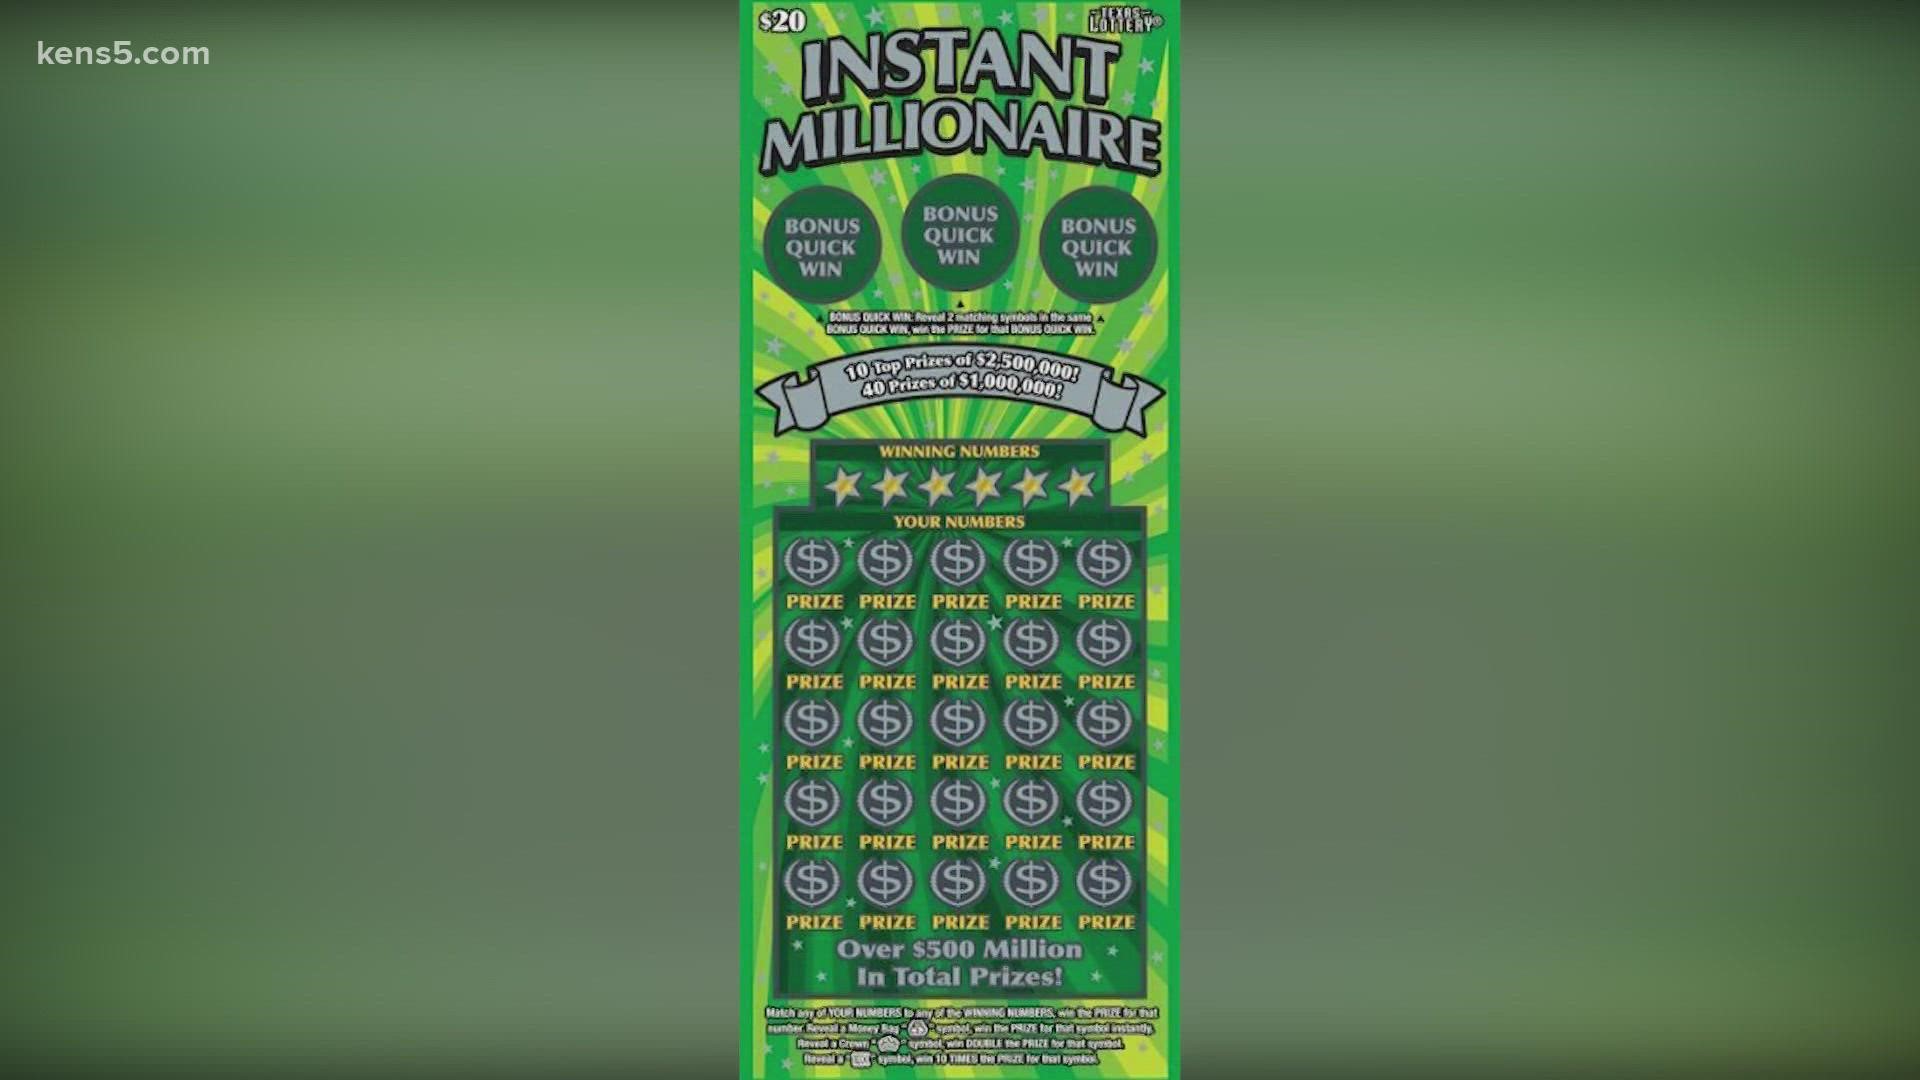 The Texas Lottery sent a press release saying a Helotes resident claimed a top prize winning ticket worth $2.5 million playing Instant Millionaire.